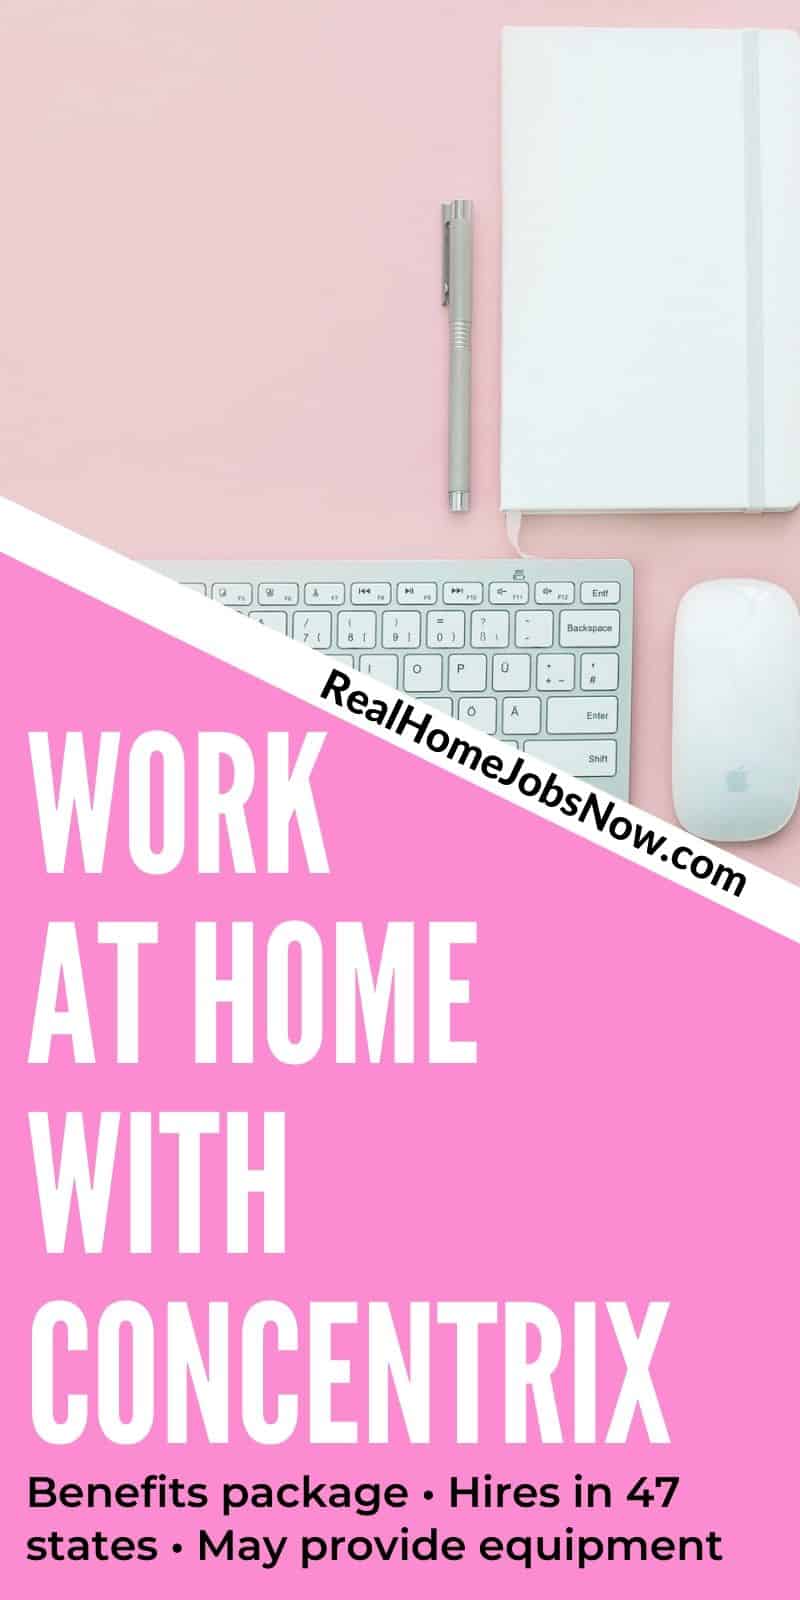 Concentrix provides legitimate work from home jobs to candidates across most of the United States. If you're looking for a customer service job with benefits and hourly pay, this might be the opportunity for you!